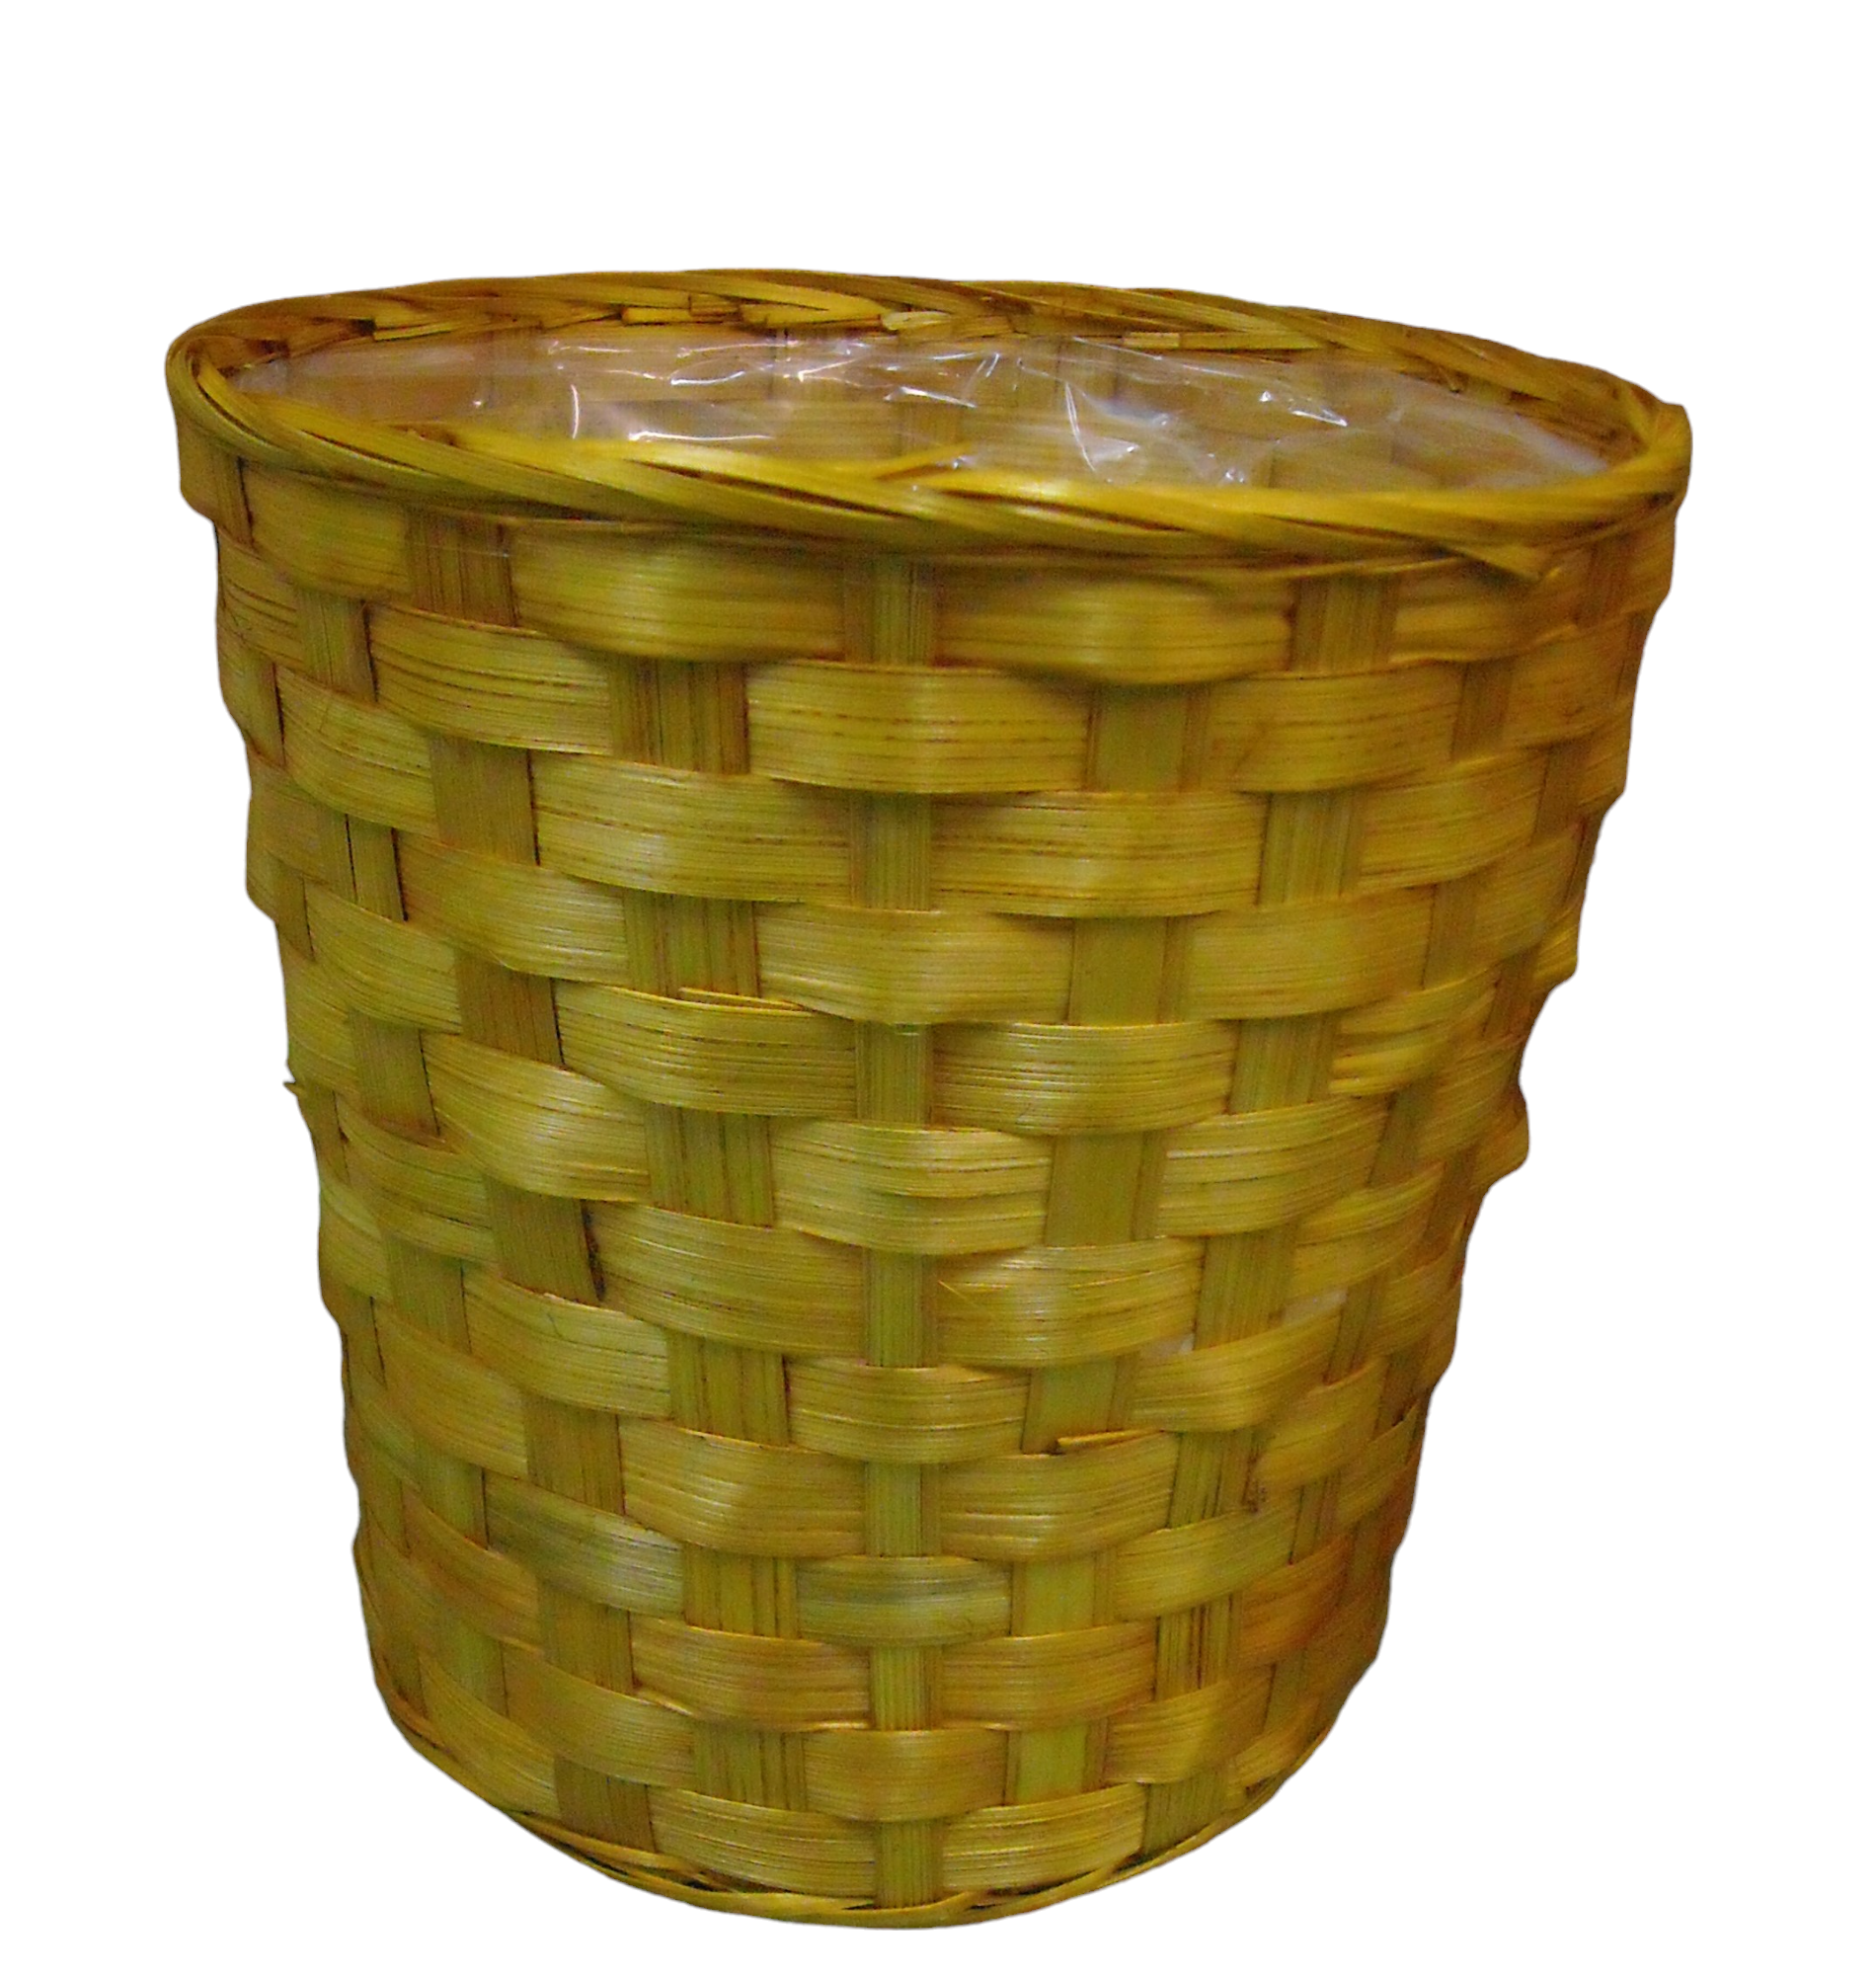 Stained (Honey Color)Bamboo Pot Cover
3 Sizes